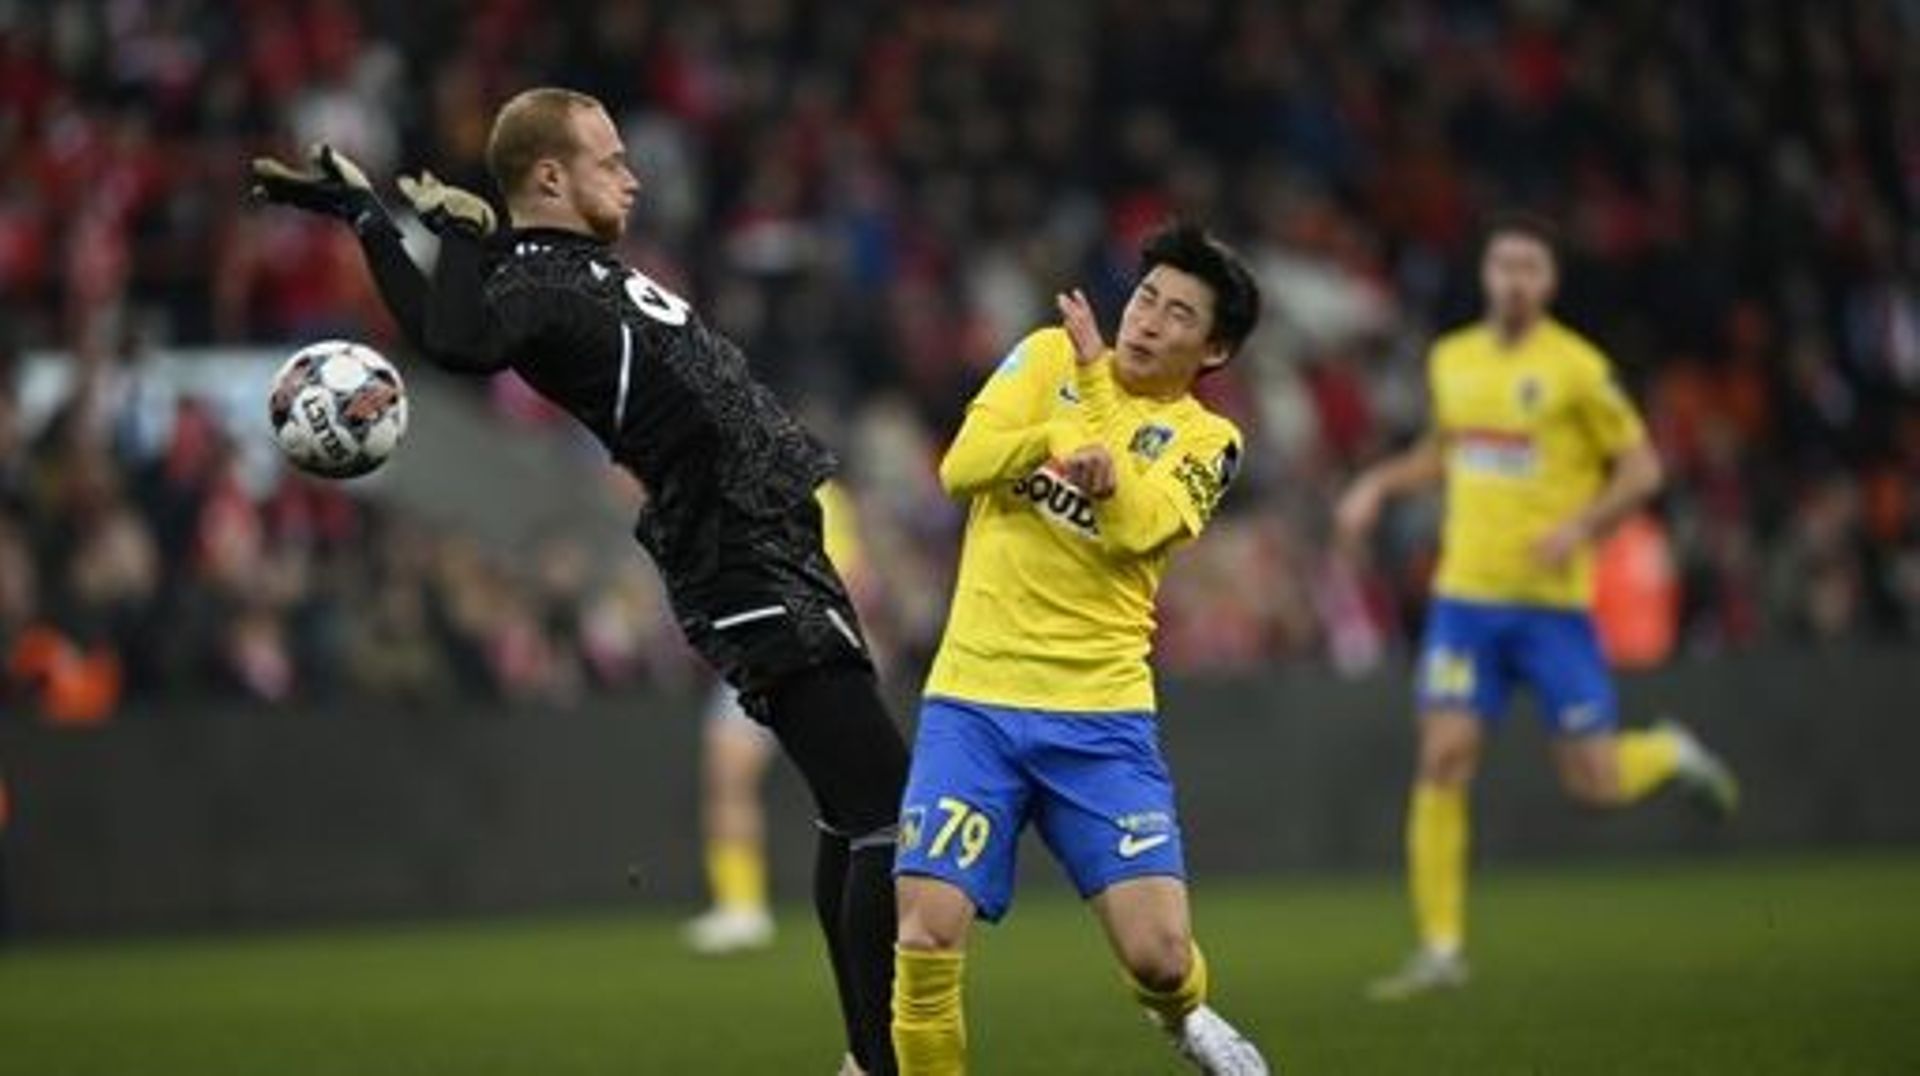 Standard's goalkeeper Arnaud Bodart and Westerlo's Yusuke Matsuo fight for the ball during a soccer match between Standard de Liege and KVC Westerlo, Saturday 04 March 2023 in Liege, on day 28 of the 2022-2023 'Jupiler Pro League' first division of the Be